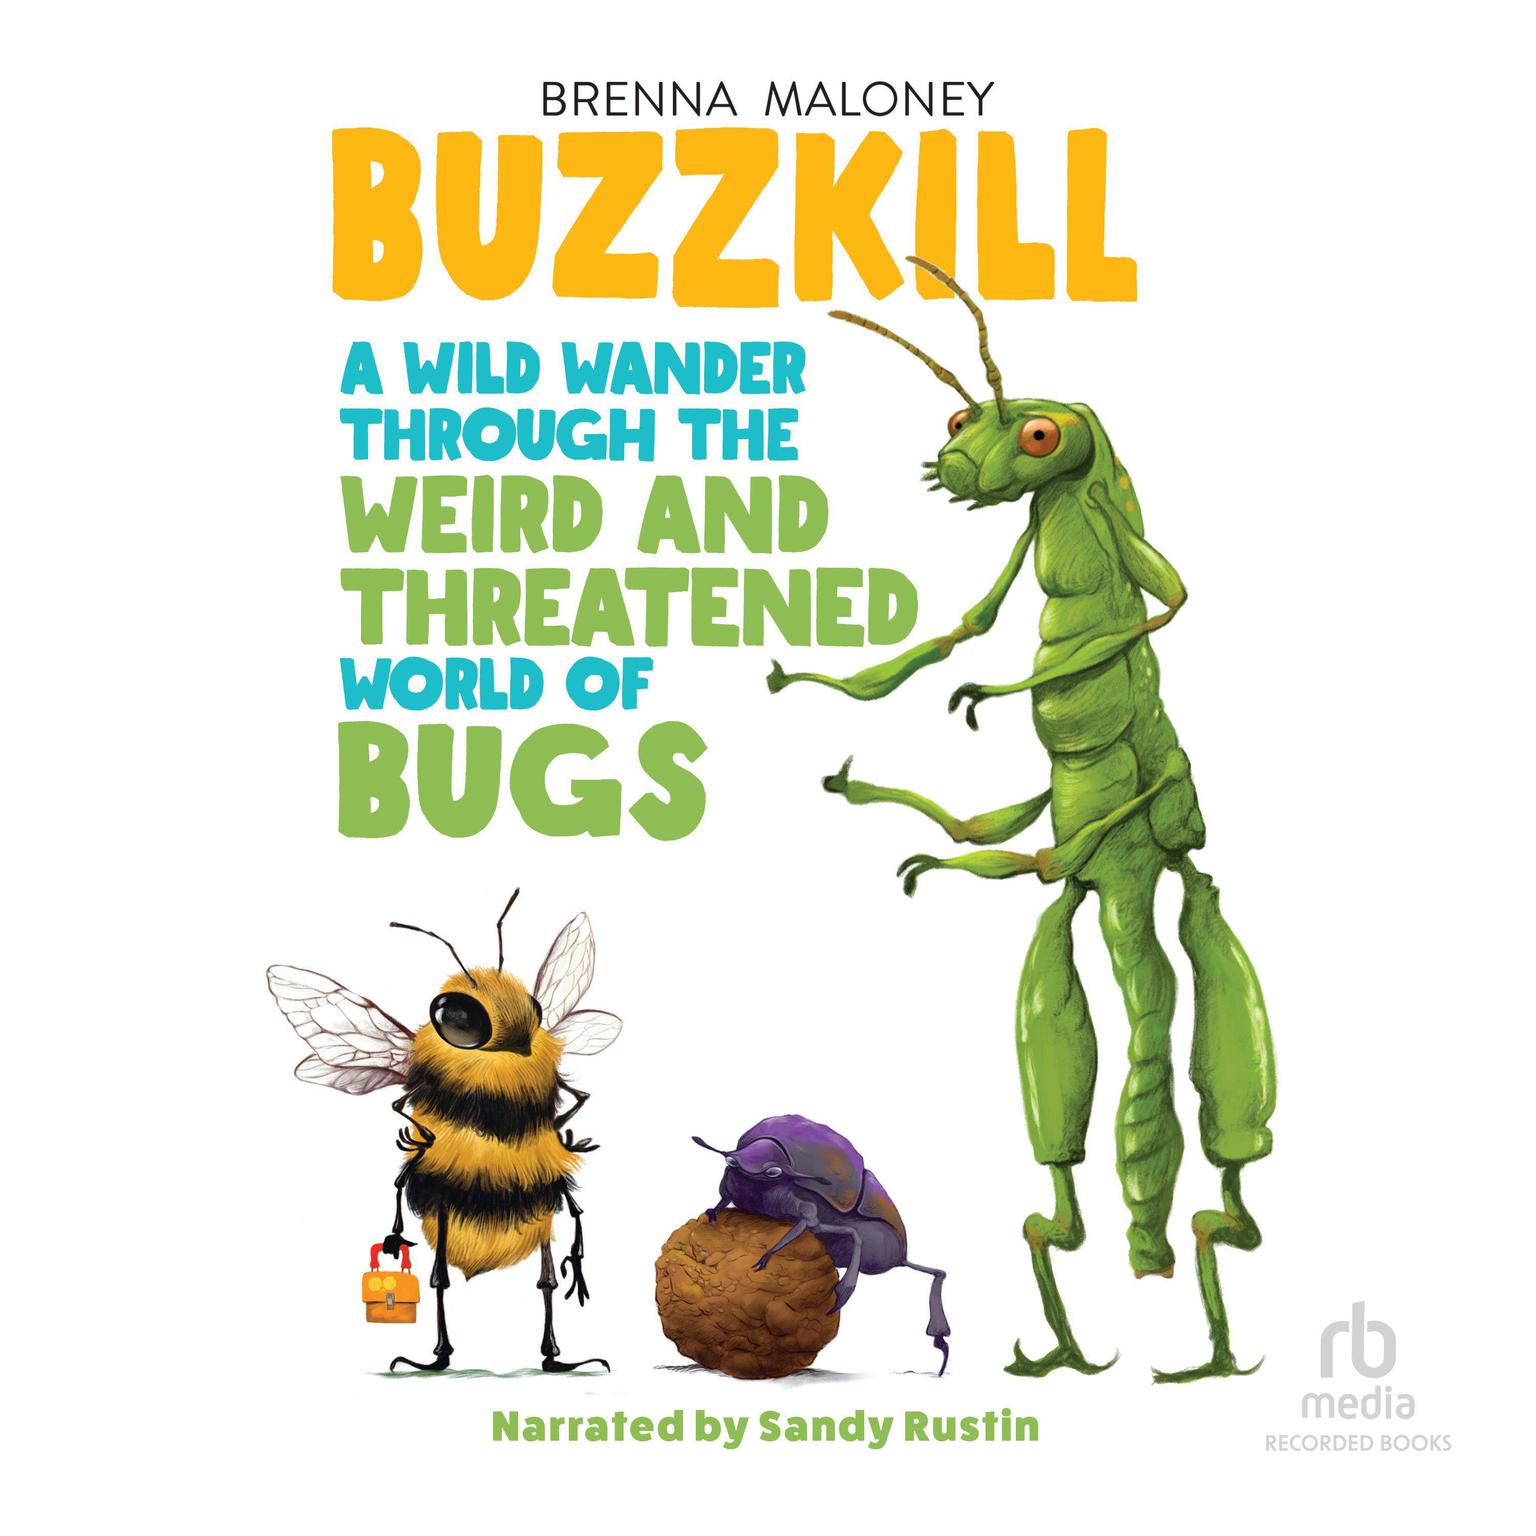 Buzzkill: A Wild Wander Through the Weird and Threatened World of Bugs Audiobook, by Brenna Maloney